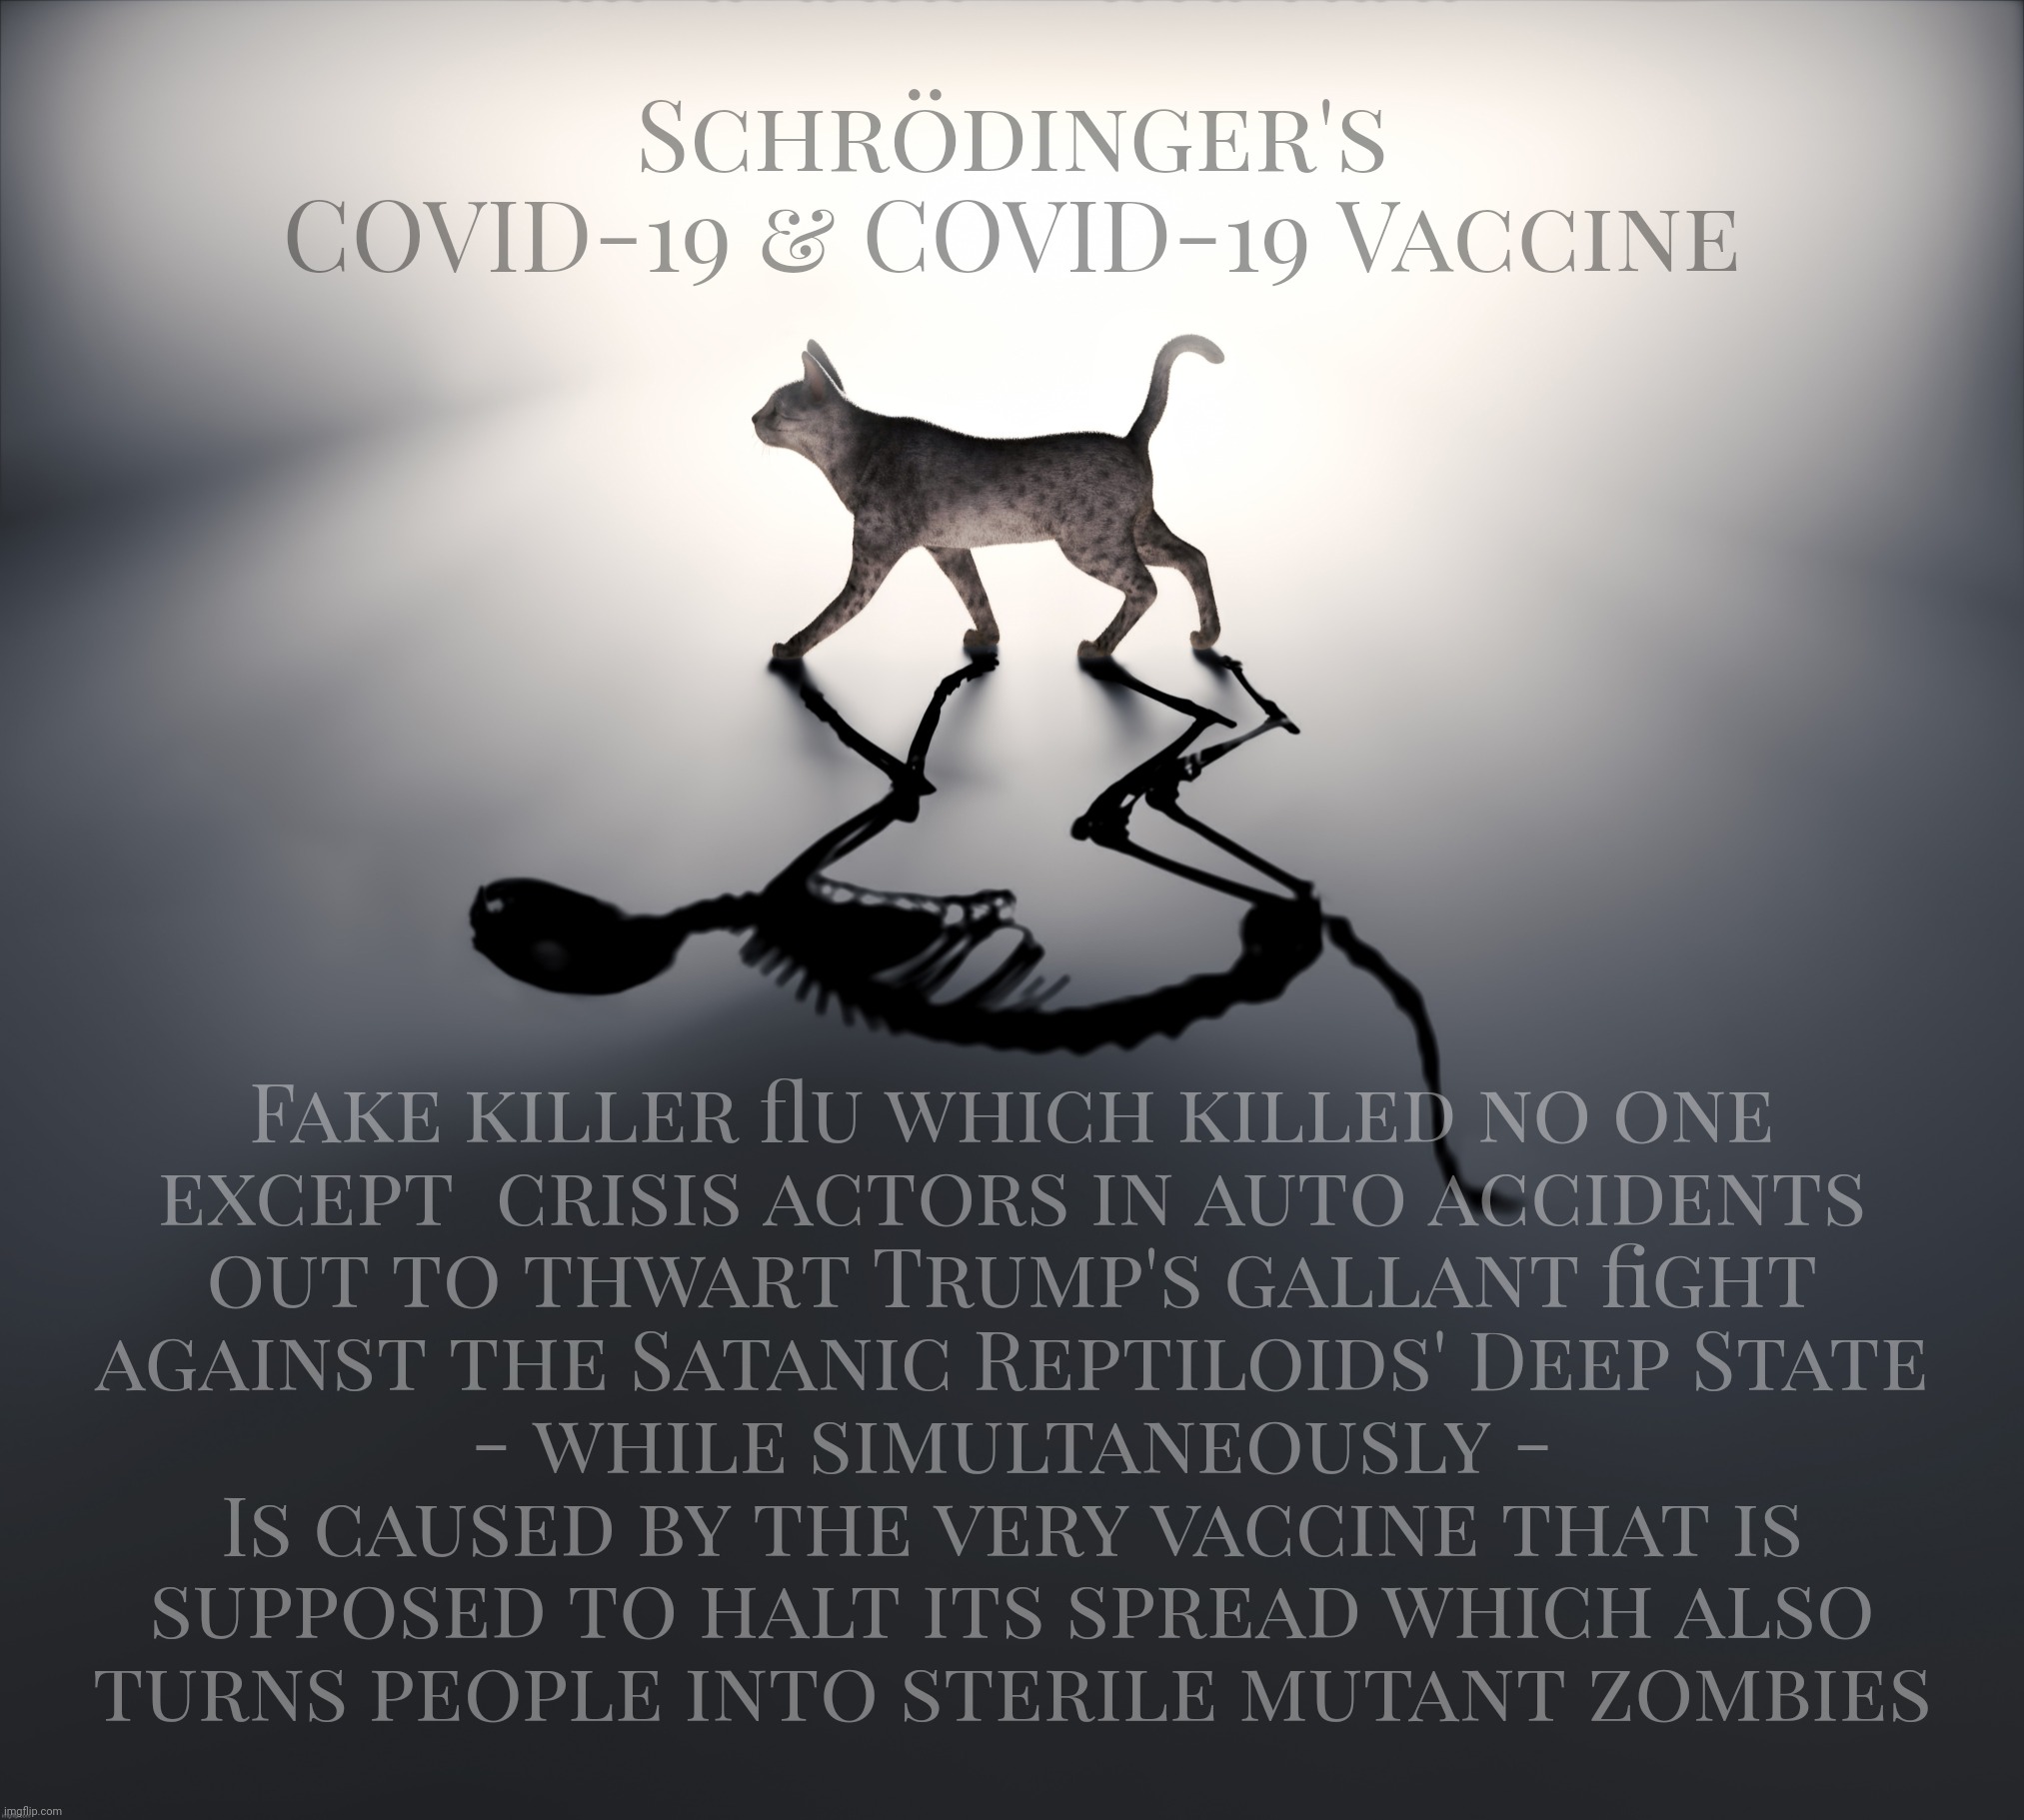 Schrödinger's COVID-19 & Vaxx Cat | Schrödinger's
COVID-19 & COVID-19 Vaccine; Fake killer flu which killed no one
except  crisis actors in auto accidents
out to thwart Trump's gallant fight
against the Satanic Reptiloids' Deep State
- while simultaneously -
Is caused by the very vaccine that is
supposed to halt its spread which also
turns people into sterile mutant zombies | image tagged in schrodinger's cat,schrodinger's covid-19,schrodinger's covid-19 vaccine,conspiracy theories,maga paranoia,trump sad | made w/ Imgflip meme maker